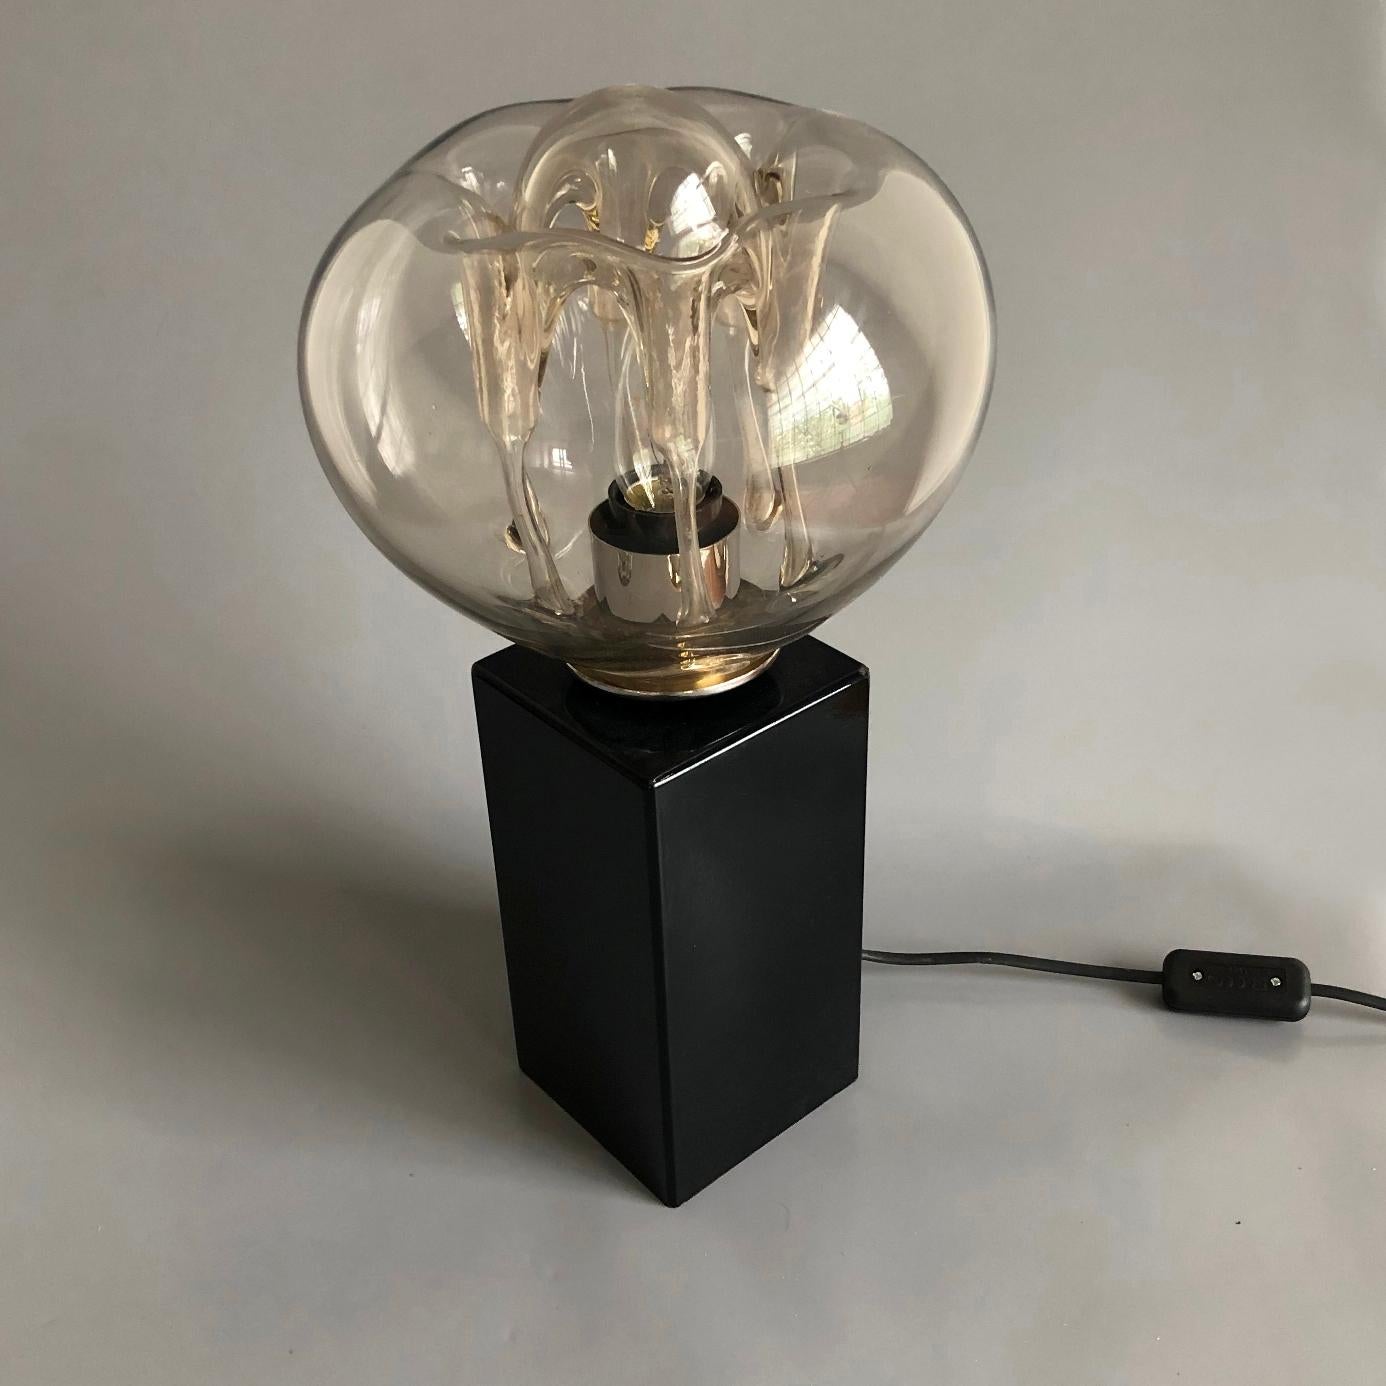 Contemporary Modernist Tesla Table Lamp by Studio Kvarda, Hungary, 2010s For Sale